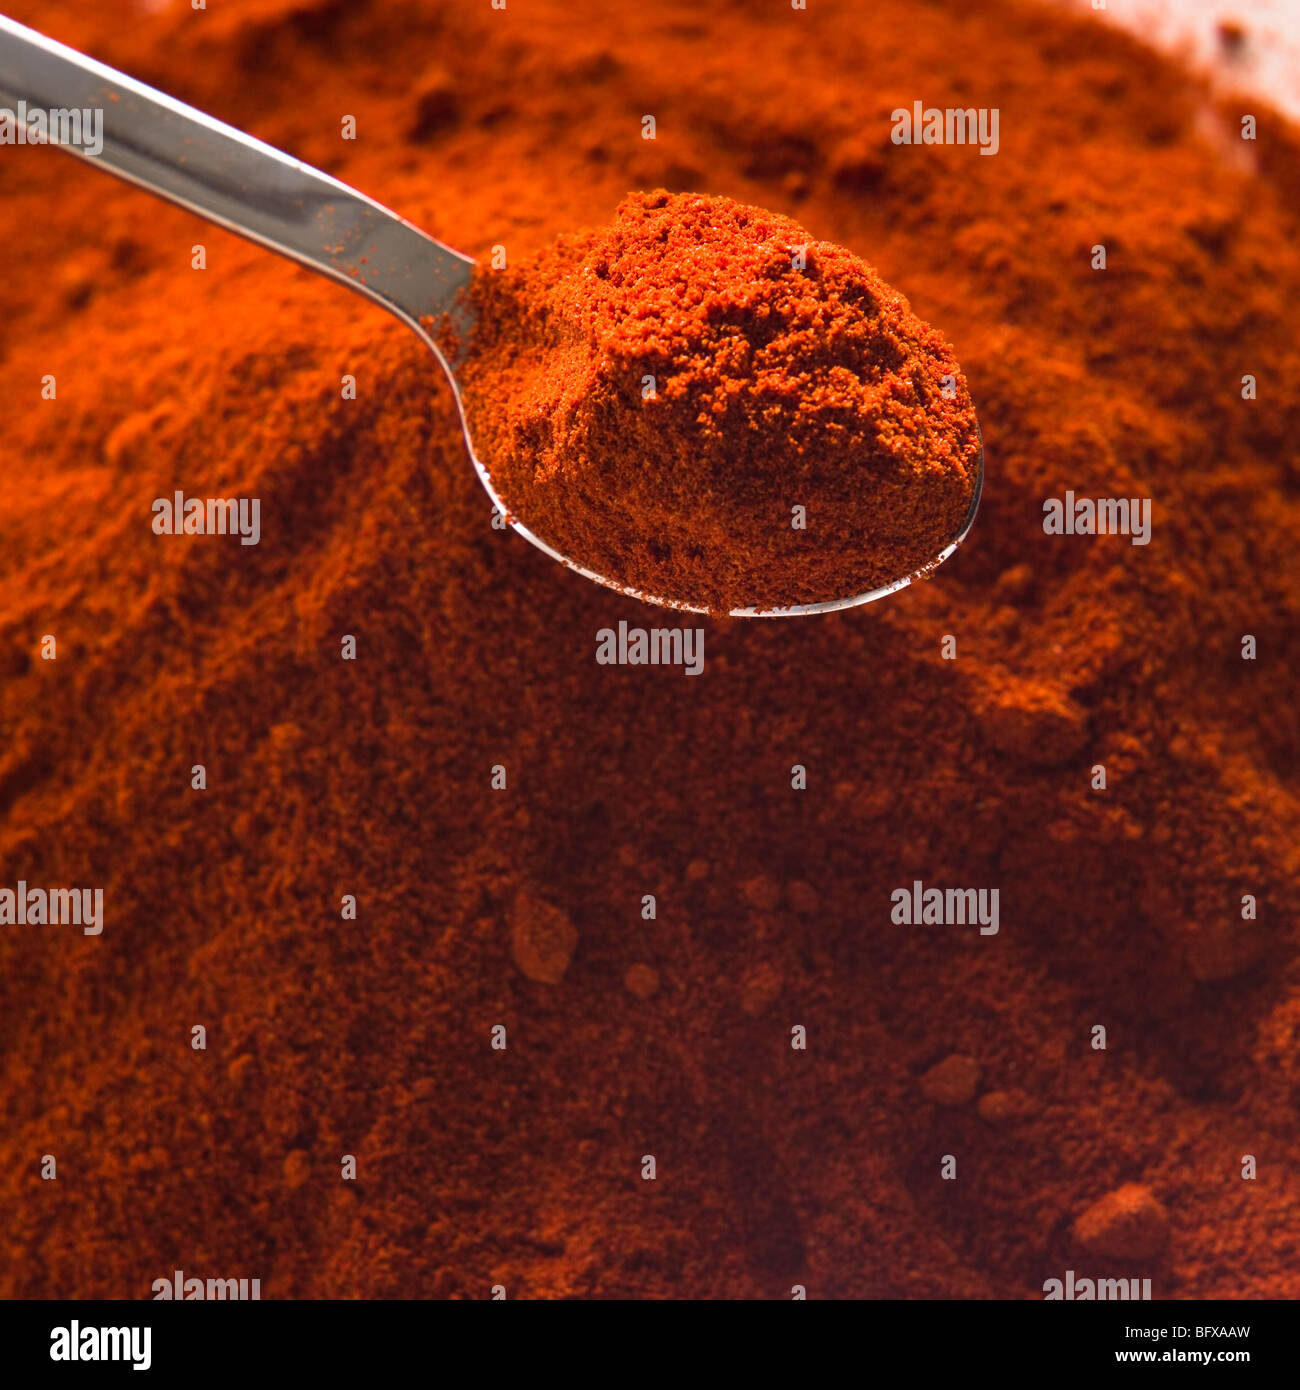 Pile of curry powder and spoon Stock Photo